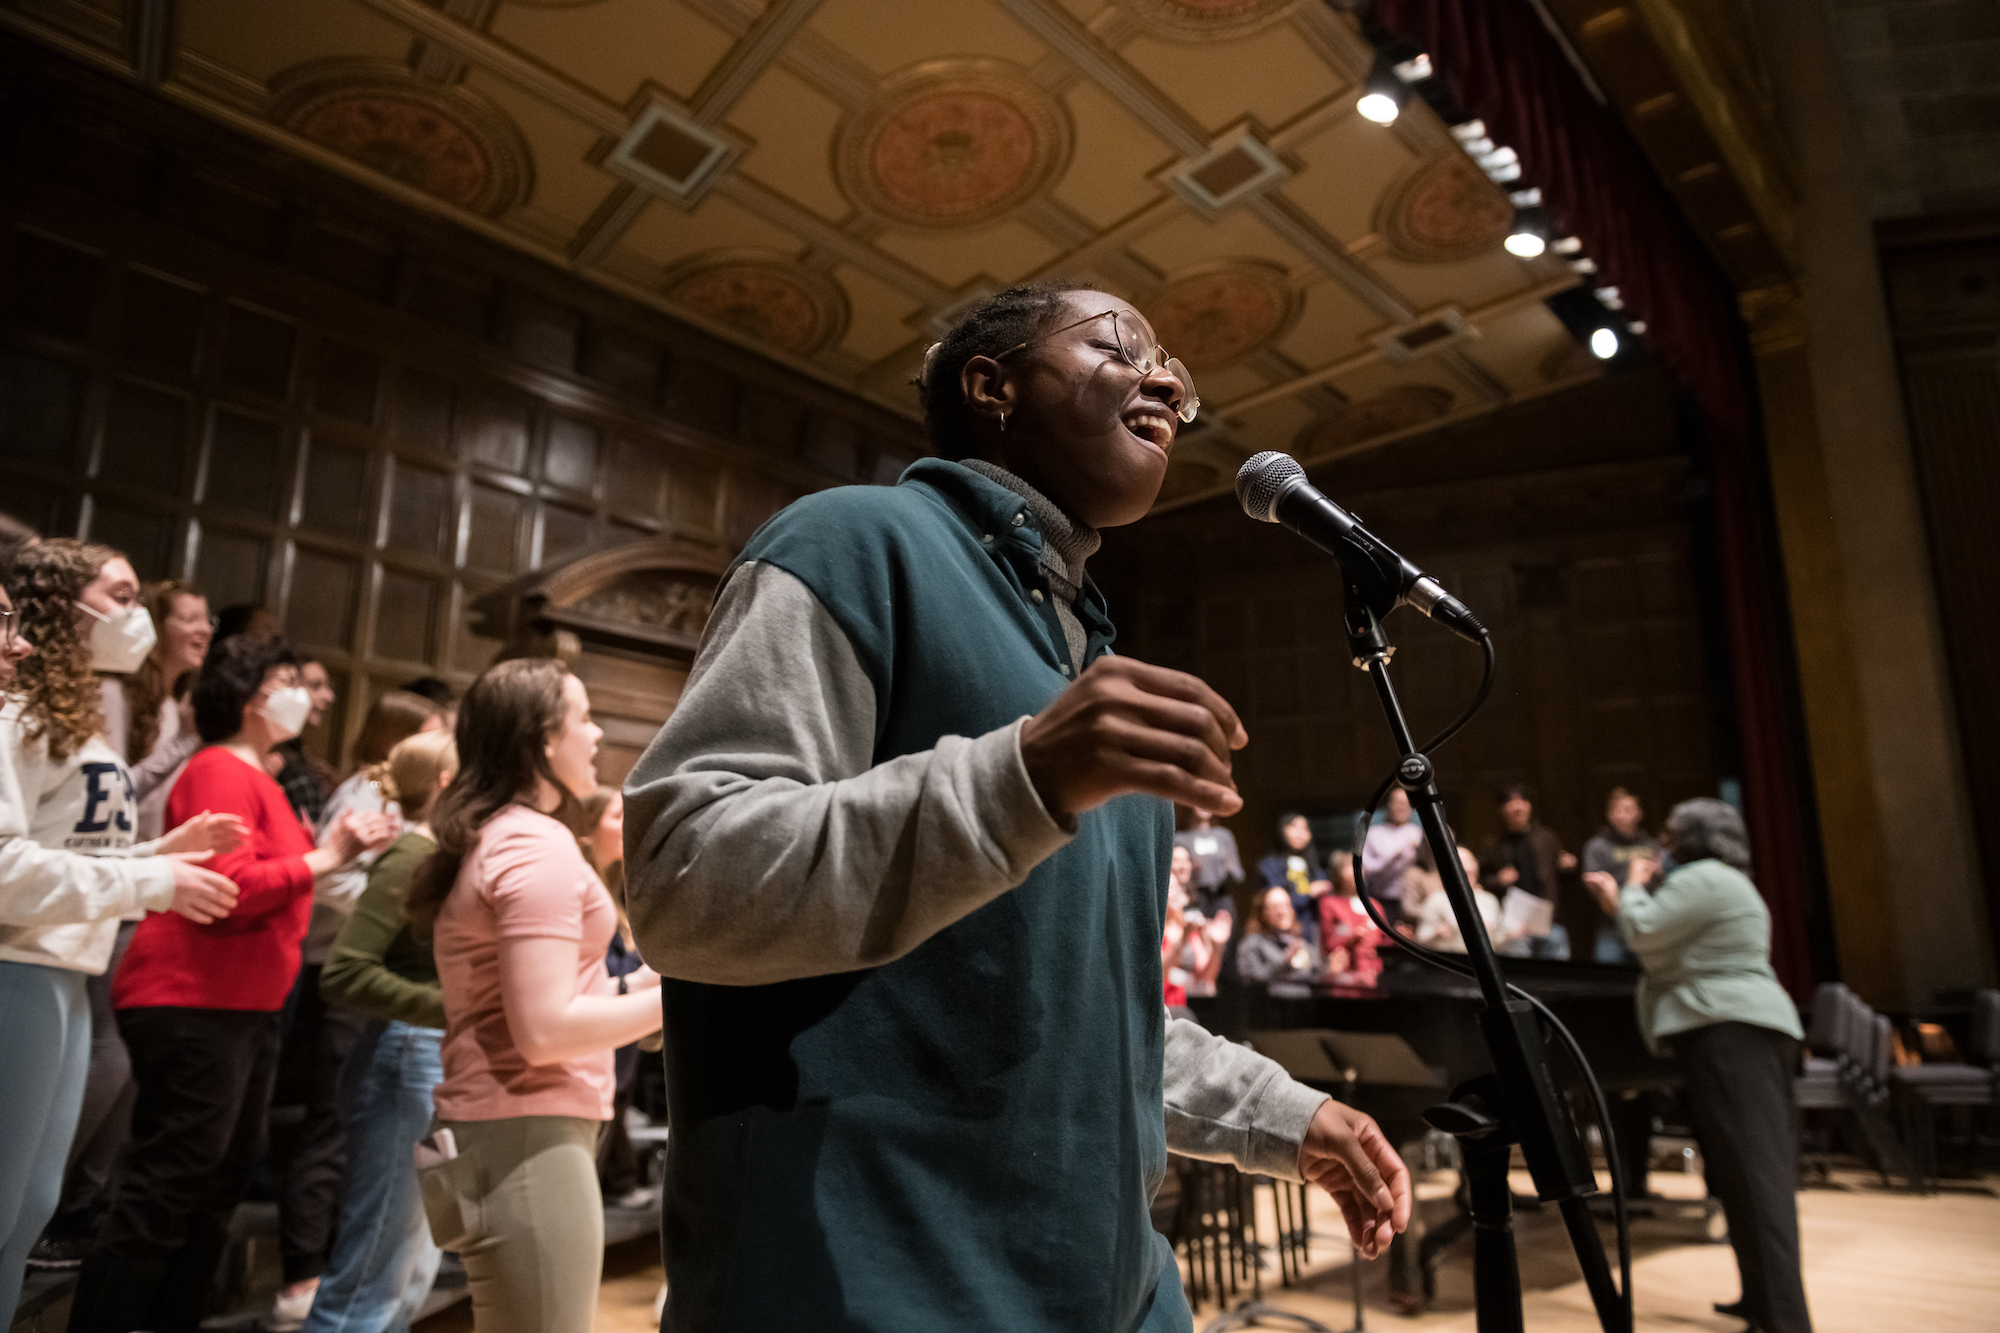 Singer steps up to microphone for a solo amid a choral rehearsal